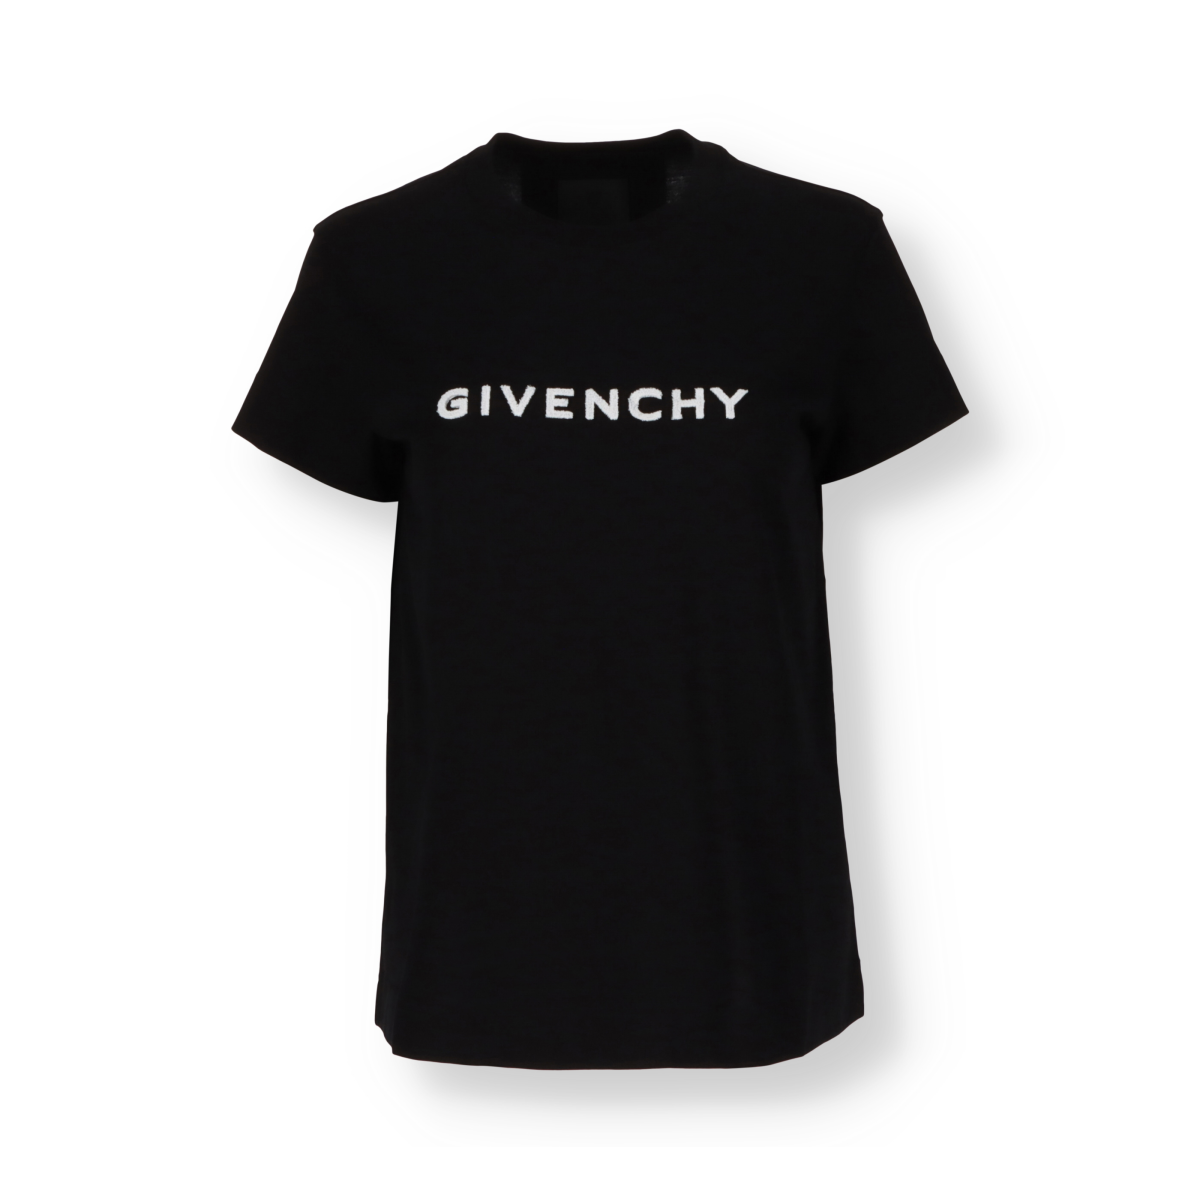 T-Shirt Givenchy geprägt